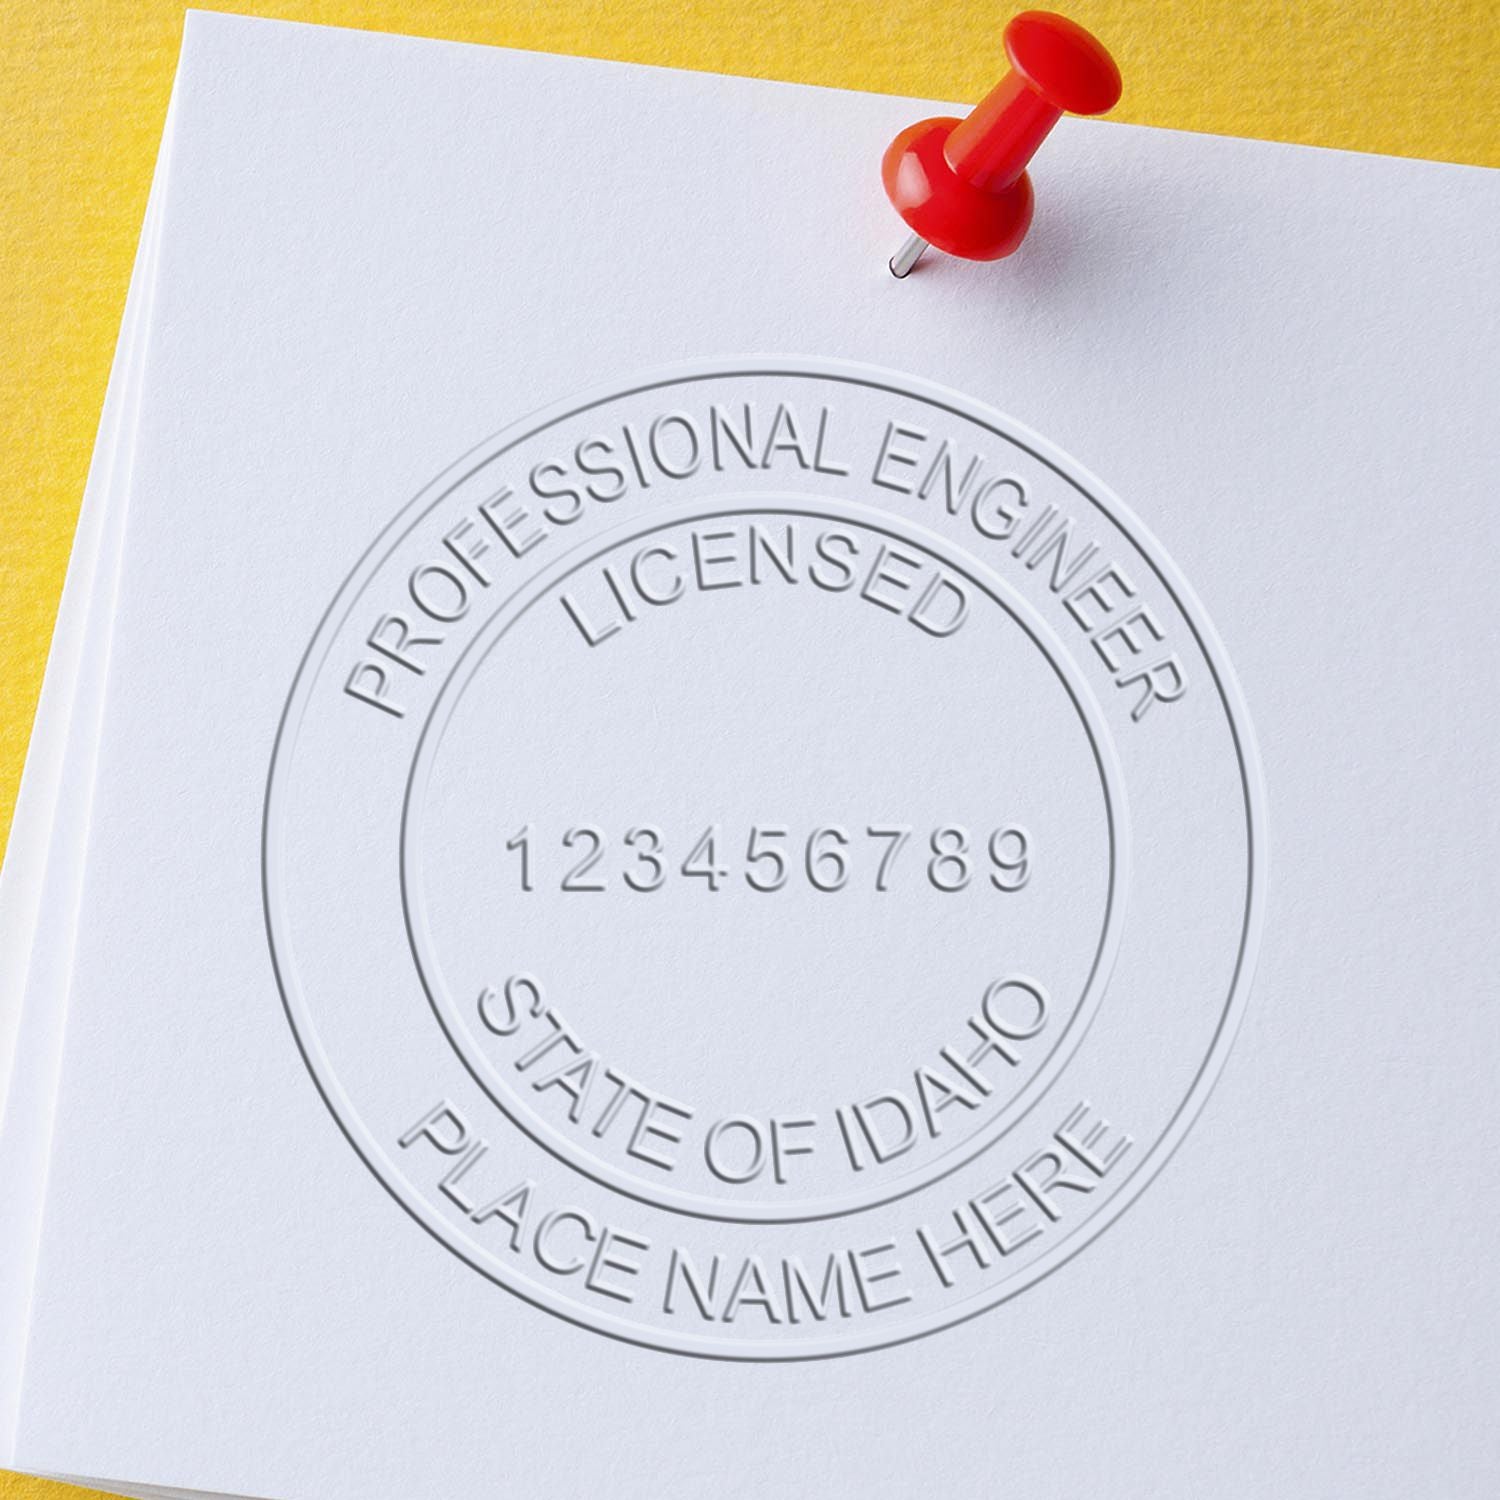 A stamped impression of the Handheld Idaho Professional Engineer Embosser in this stylish lifestyle photo, setting the tone for a unique and personalized product.